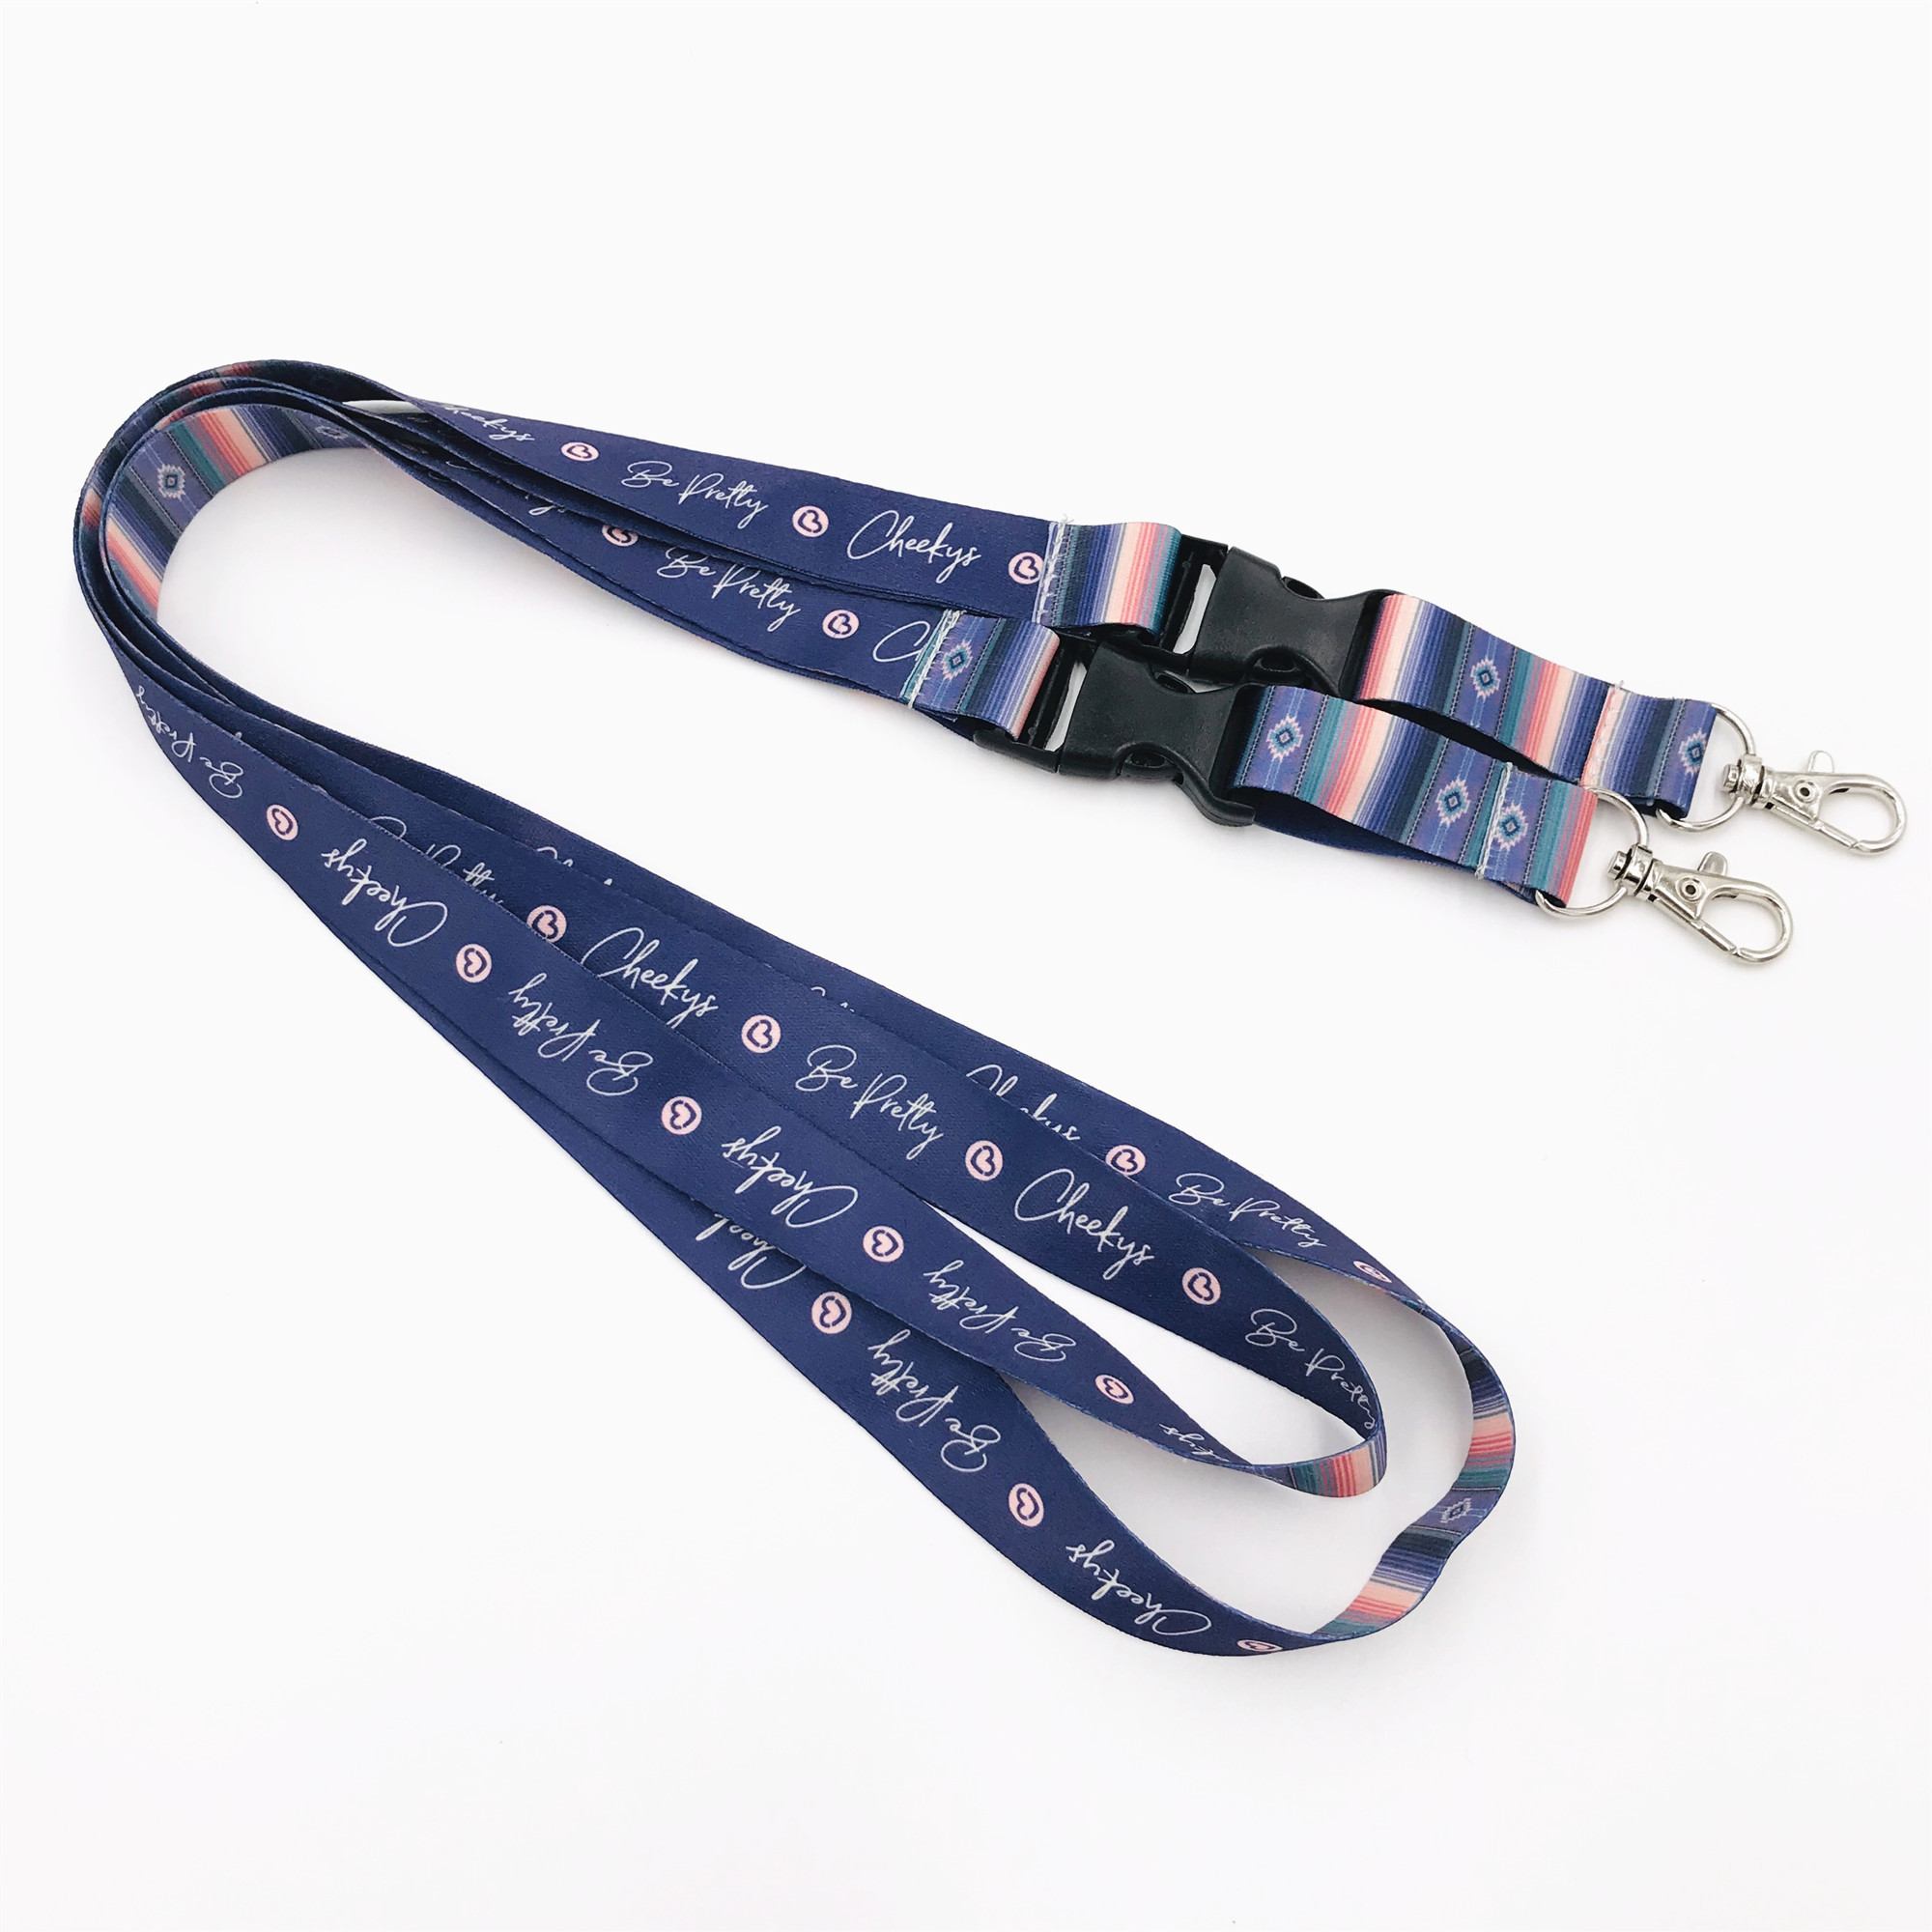 Promotional business high quality polyester customized lanyard